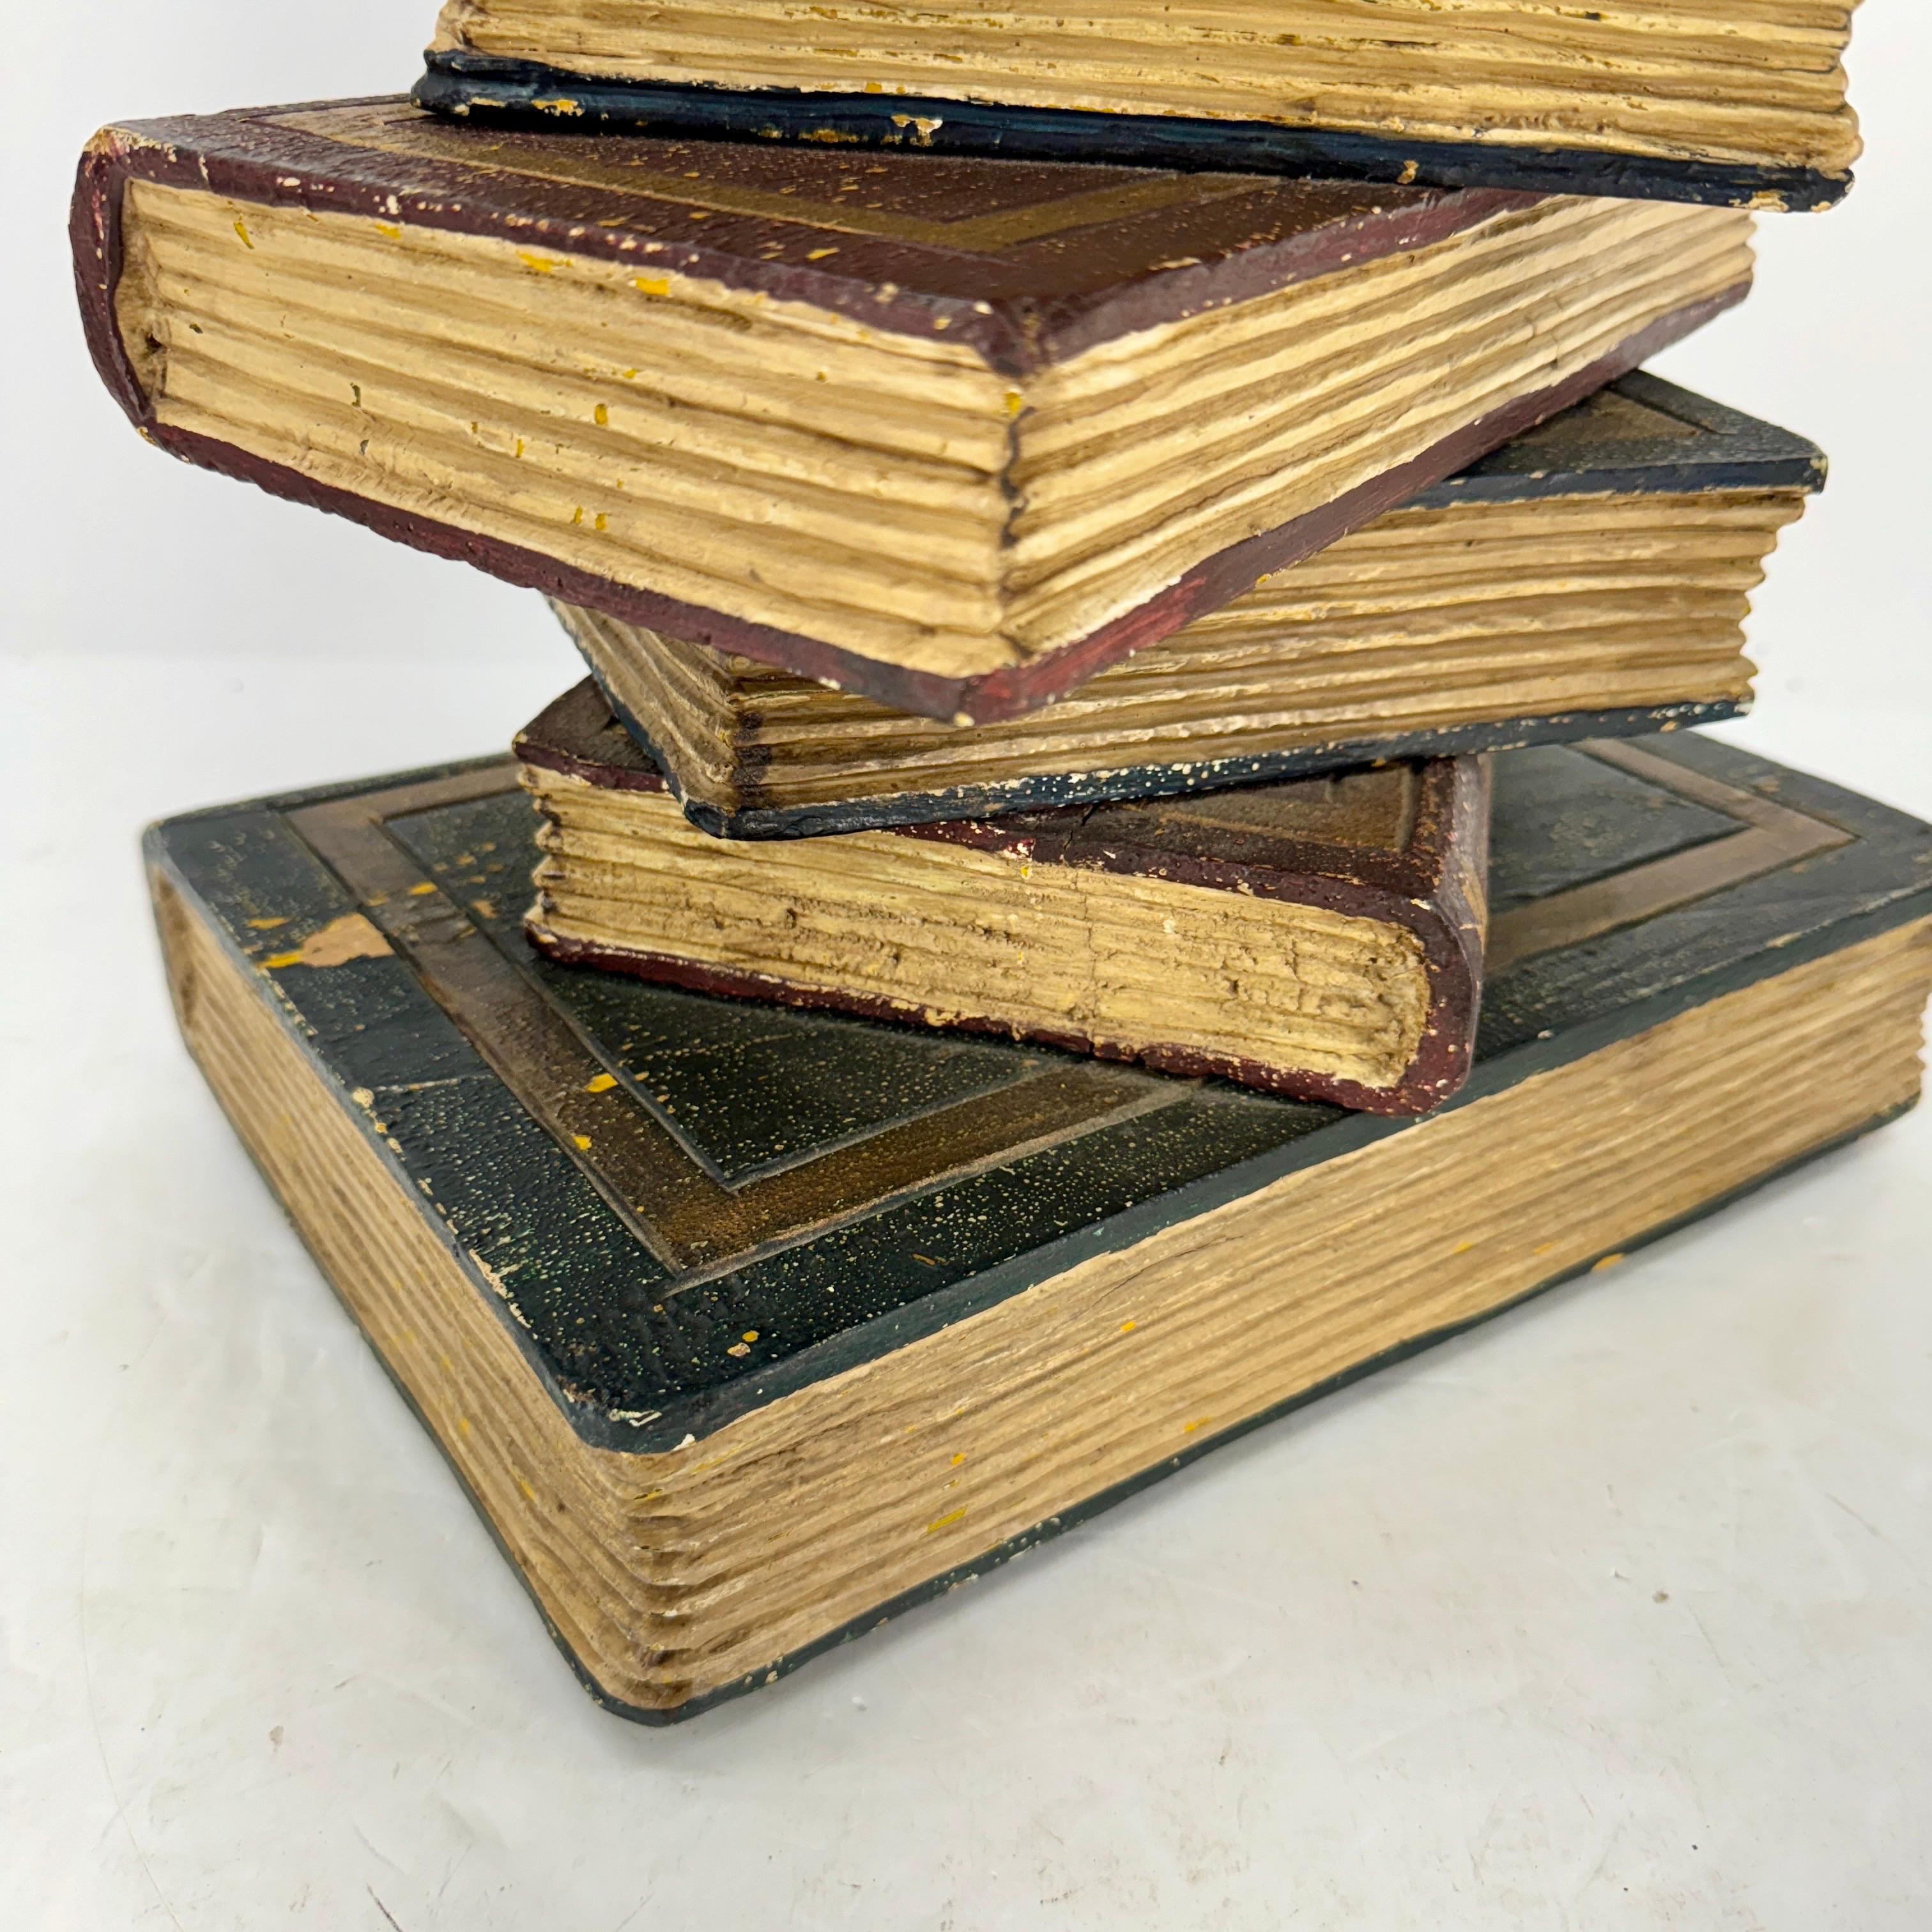  Faux Sculpture of Stacked Books Wood Side Table 3